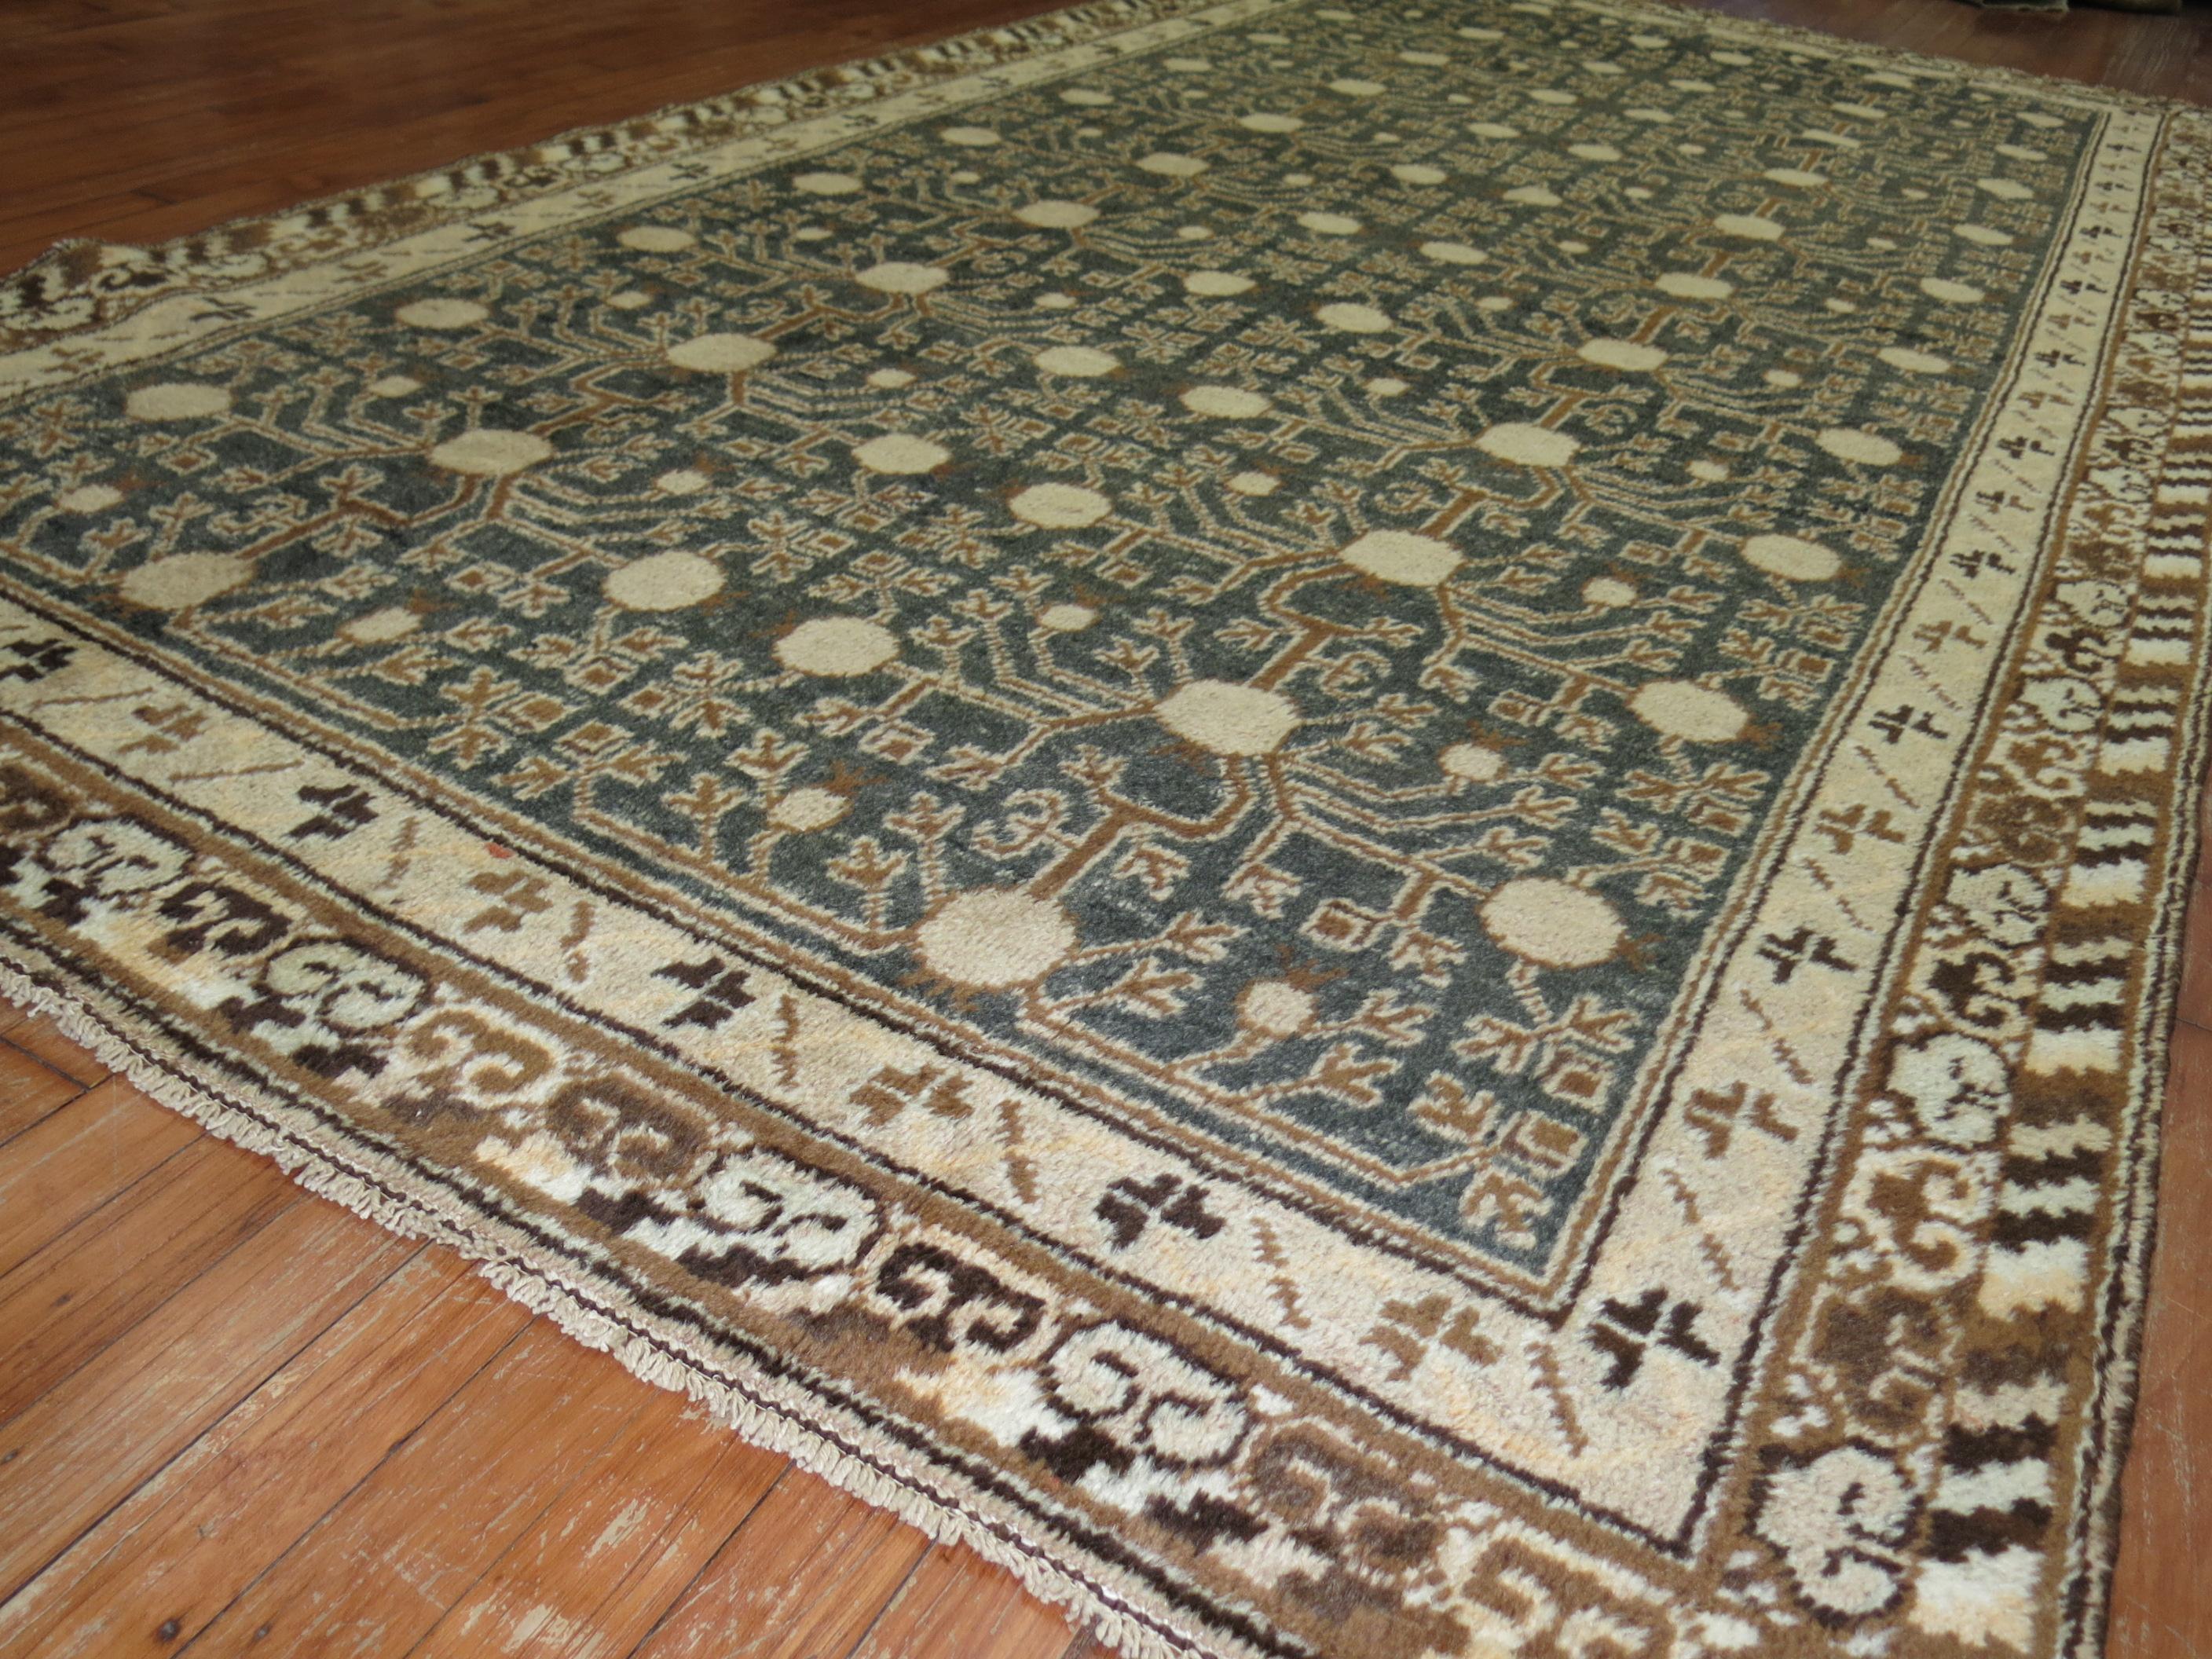 Chinoiserie Khotan Rug in Olive Green and Brown